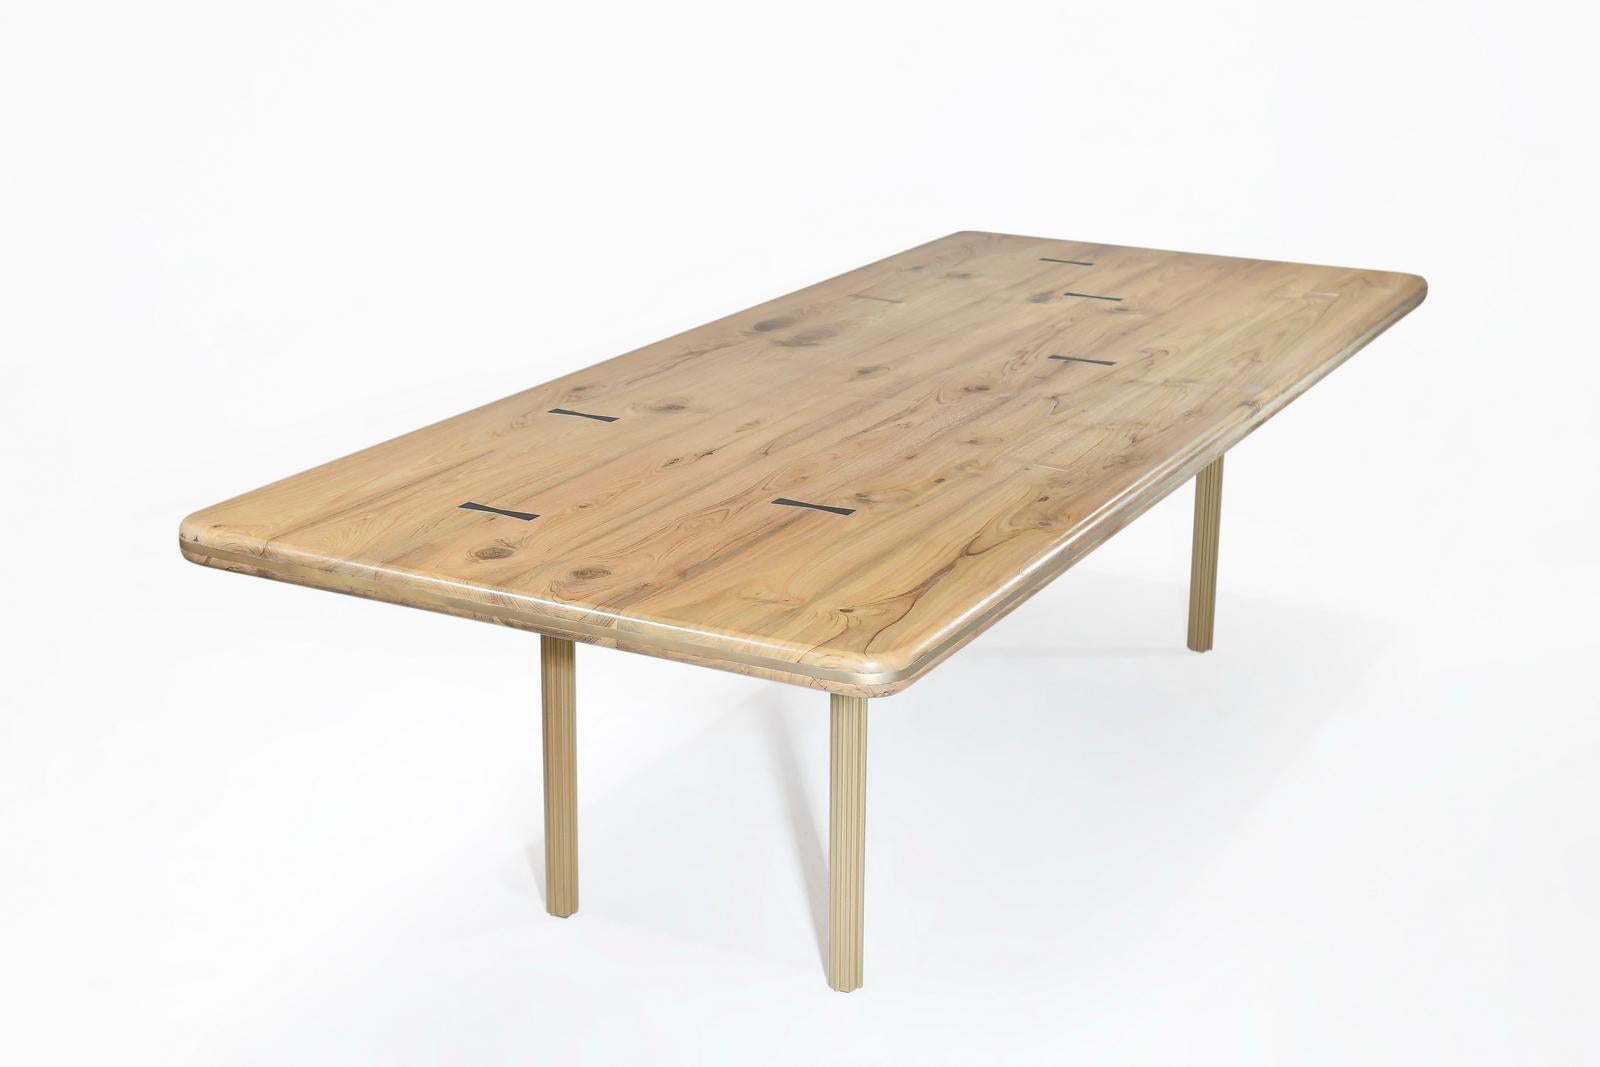 Minimalist Bespoke Dining Table, Reclaimed Wood and Extruded Brass Base by P. Tendercool For Sale